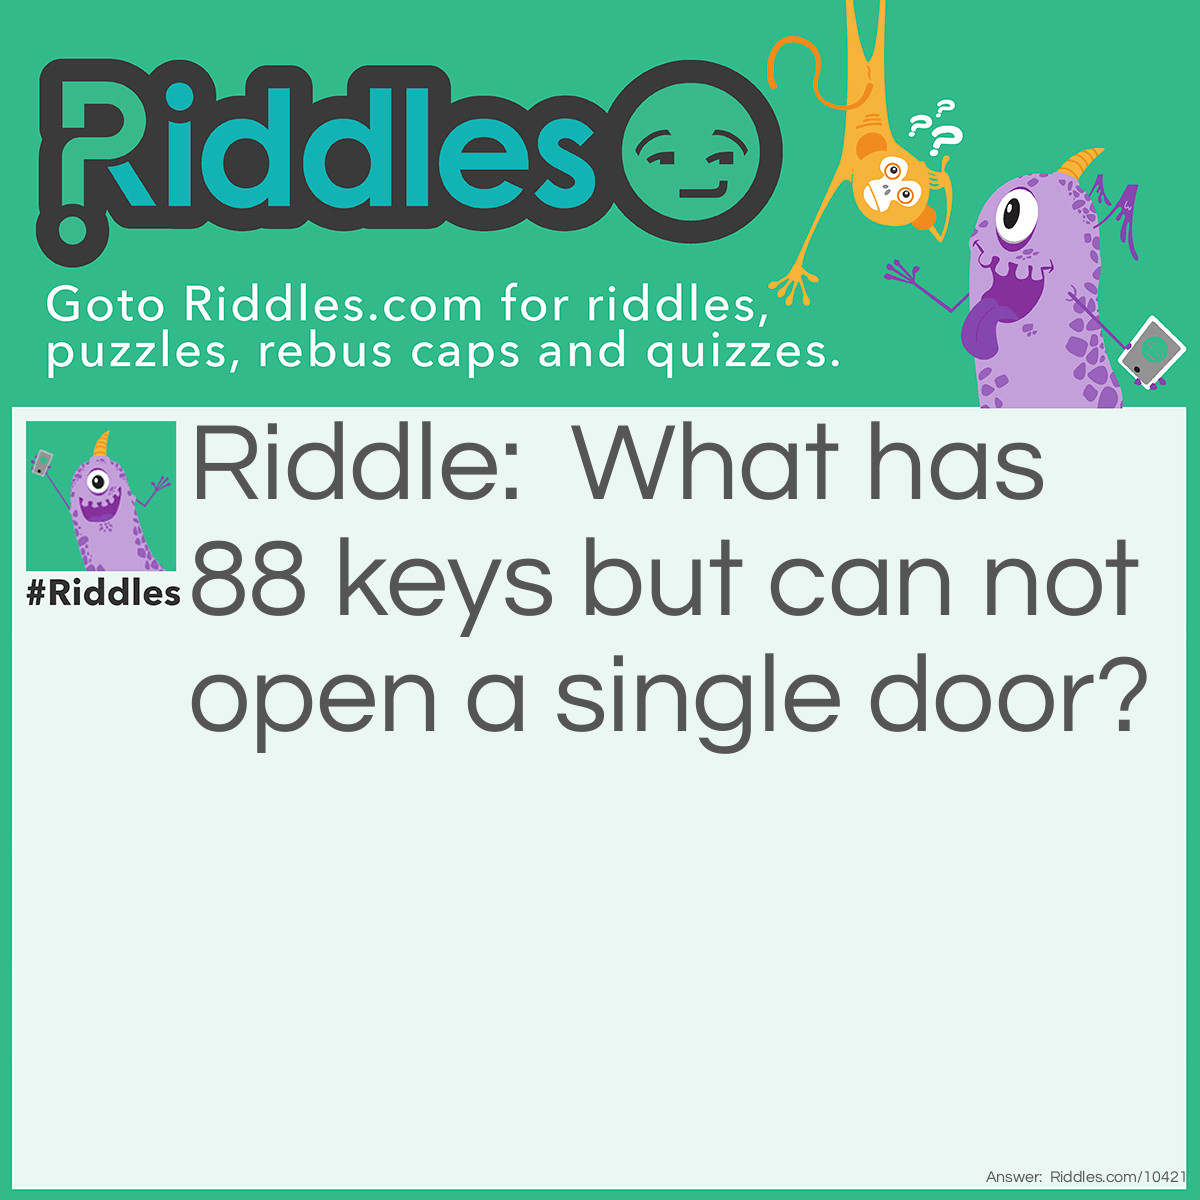 Riddle: What has 88 keys but can not open a single door? Answer: A piano.